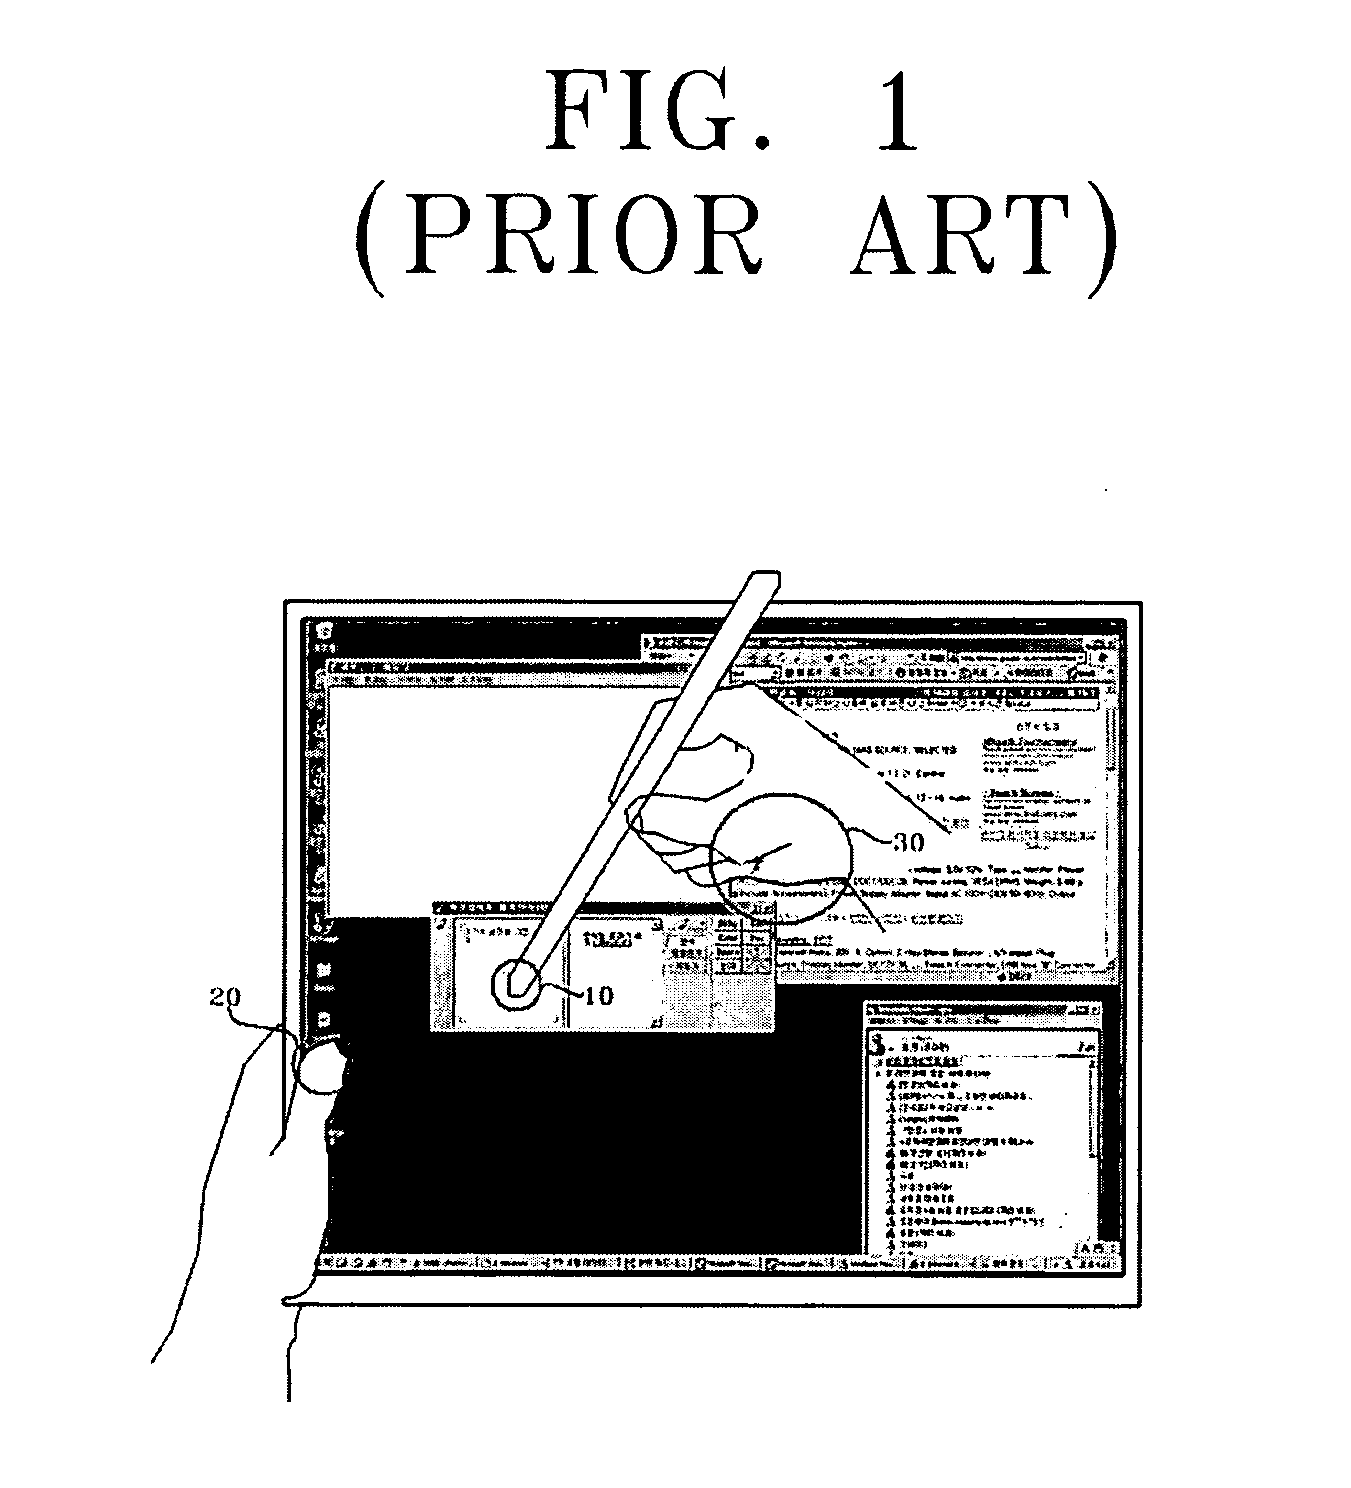 Touch screen system and control method therefor capable of setting active regions